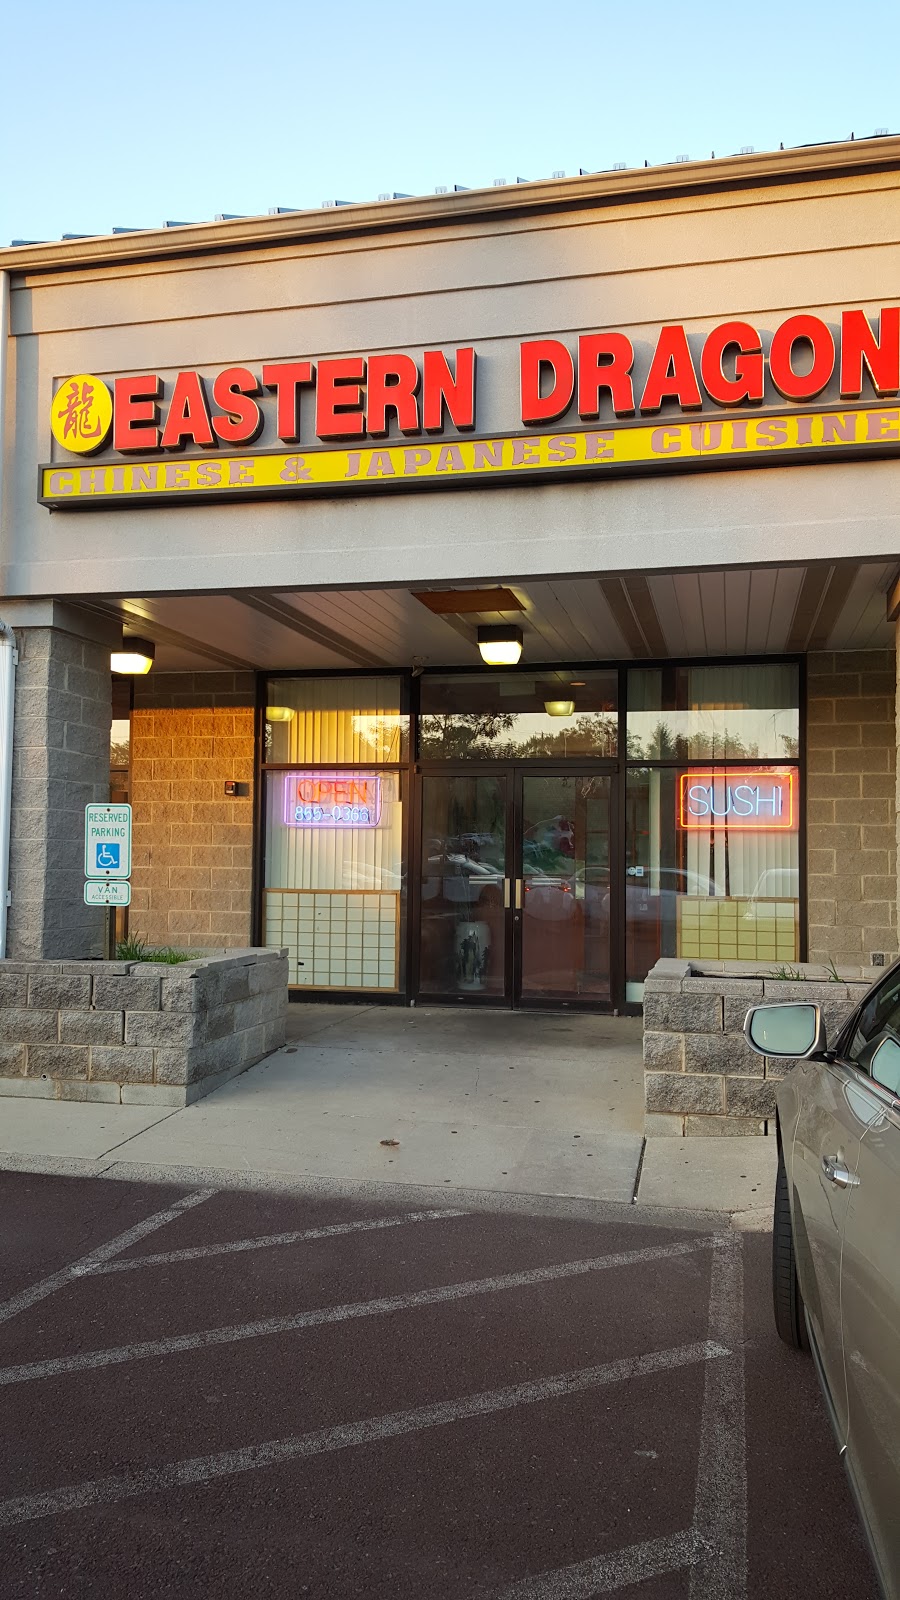 Eastern Dragon Chinese & Jpns | 830 Upper State Rd, North Wales, PA 19454 | Phone: (215) 855-0366